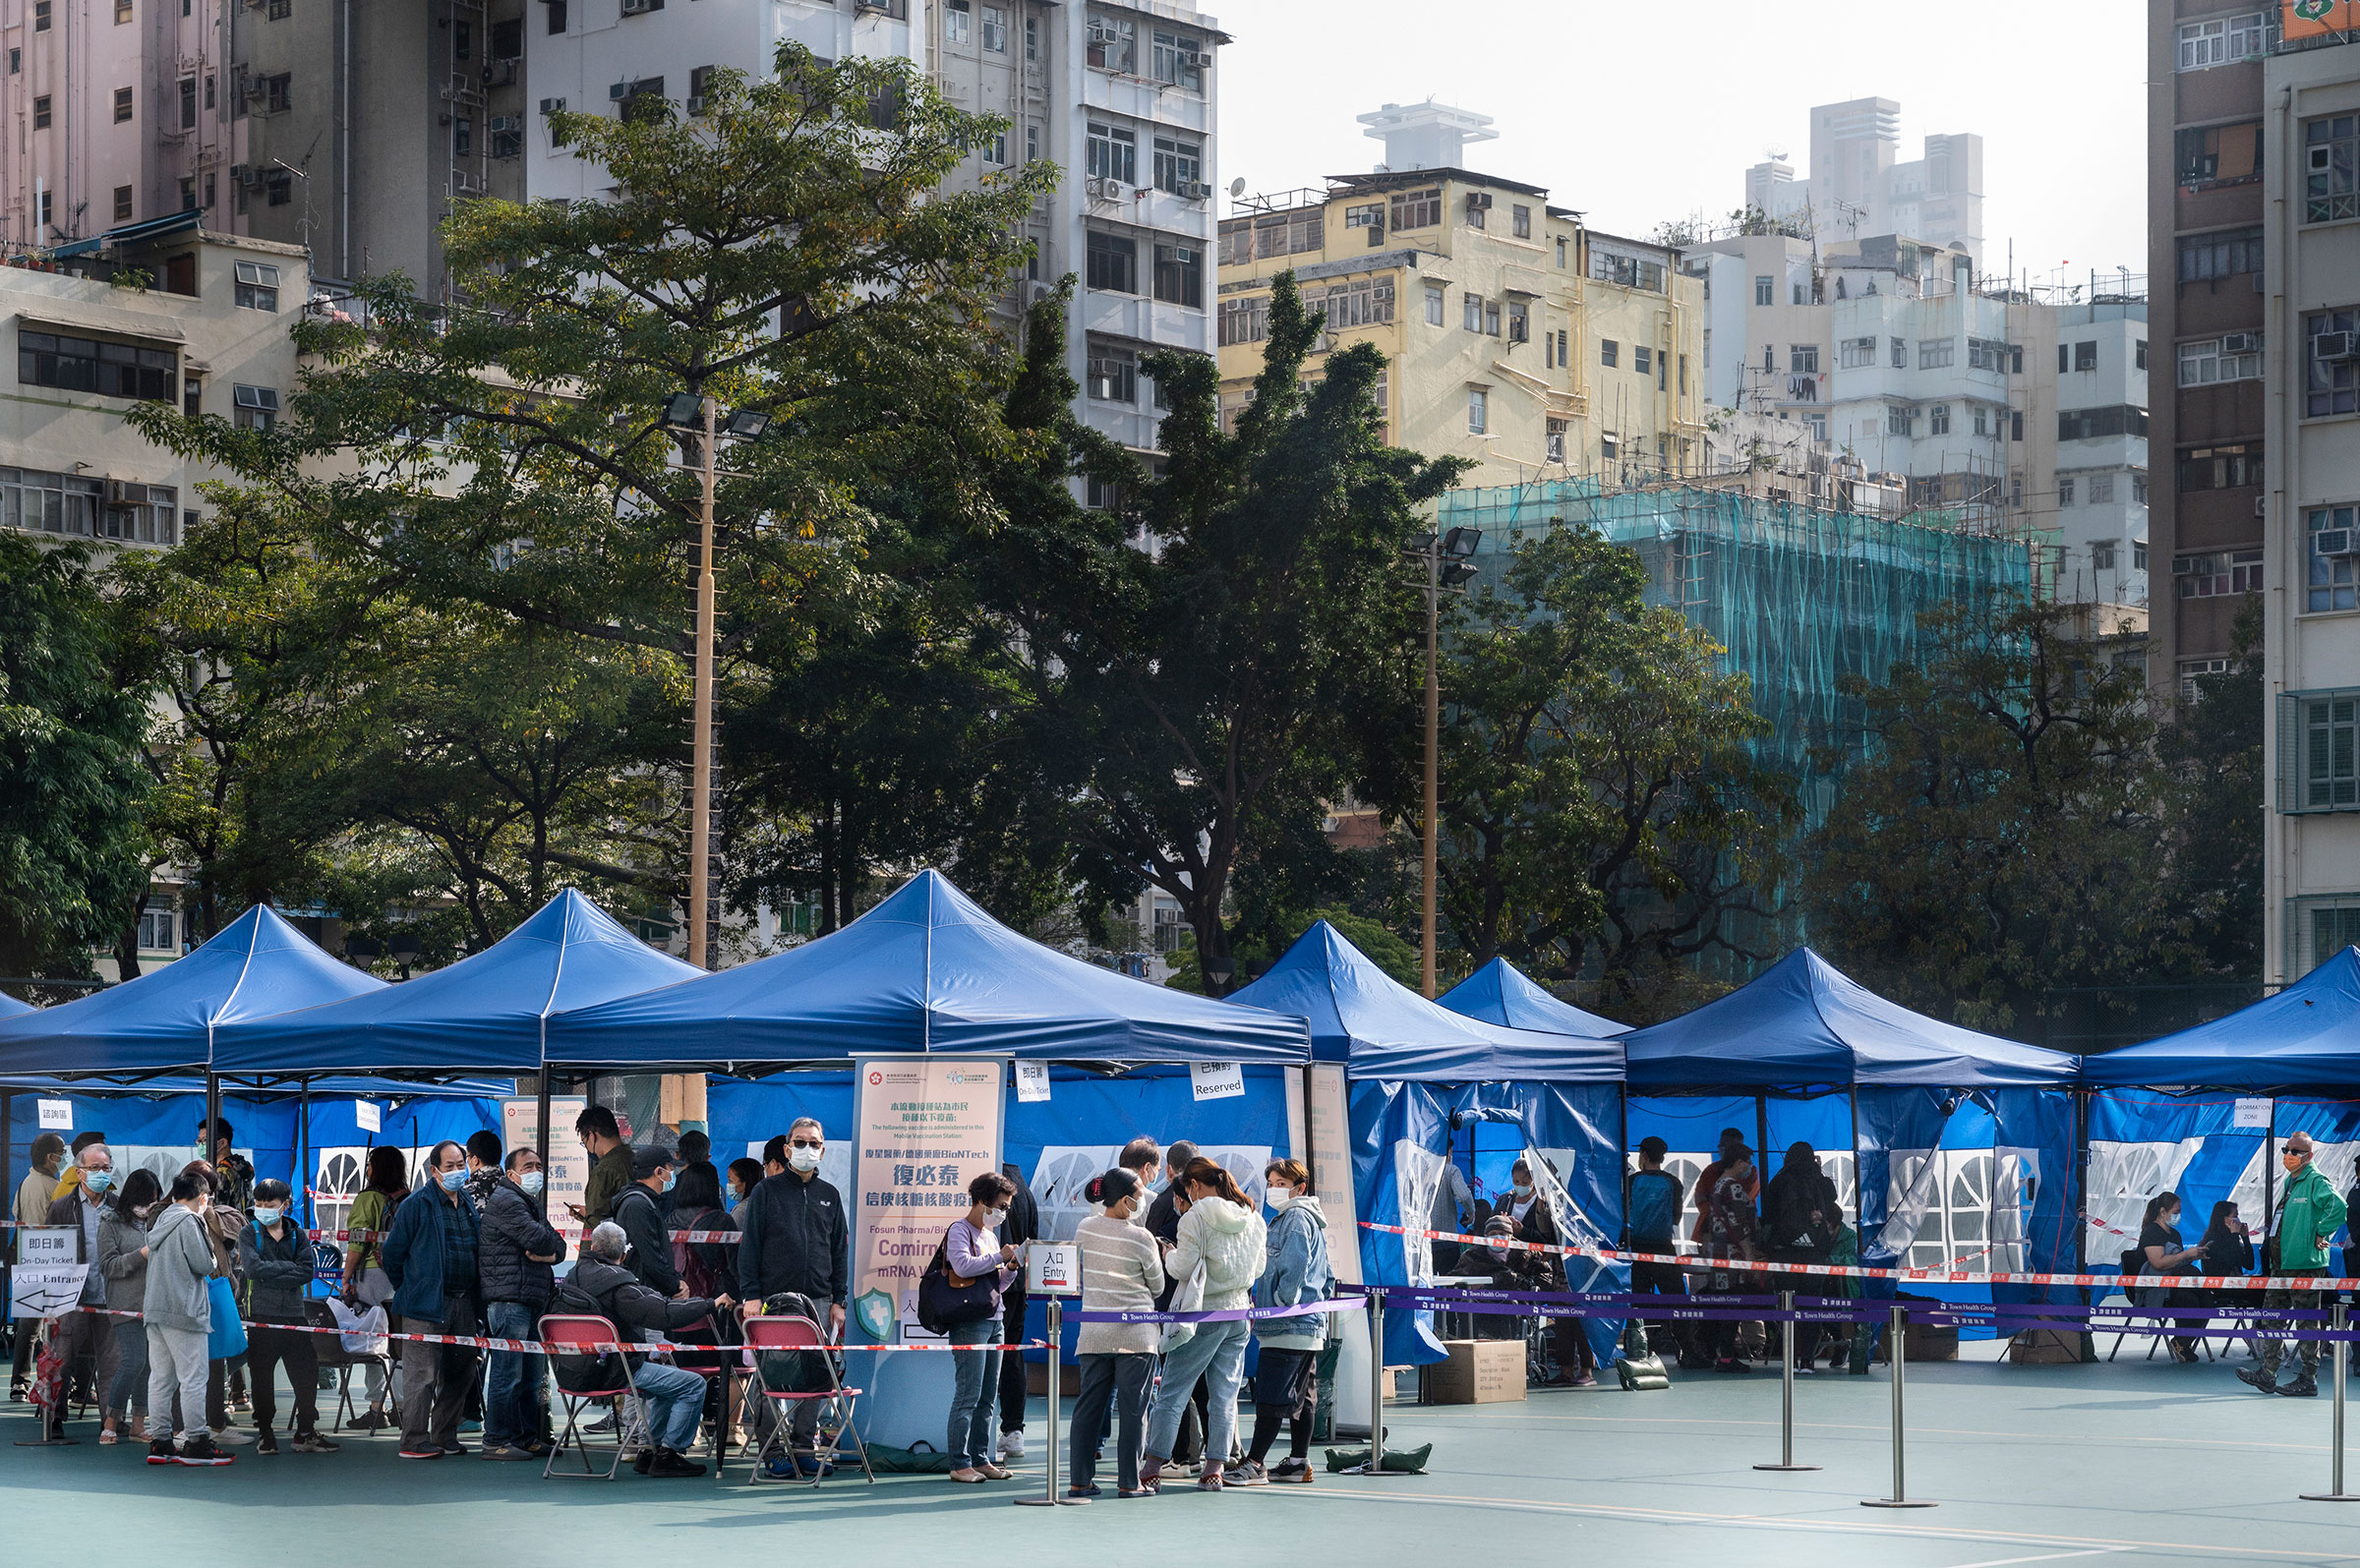 Residents wait to receive a Pfizer-BioNTech COVID-19 vaccine at a mobile vaccination station temporarily set-up for elderly residents and walk-in service in Hong Kong on Jan. 15, 2022. (Miguel Candela—SOPA Images/LightRocket/Getty Images)